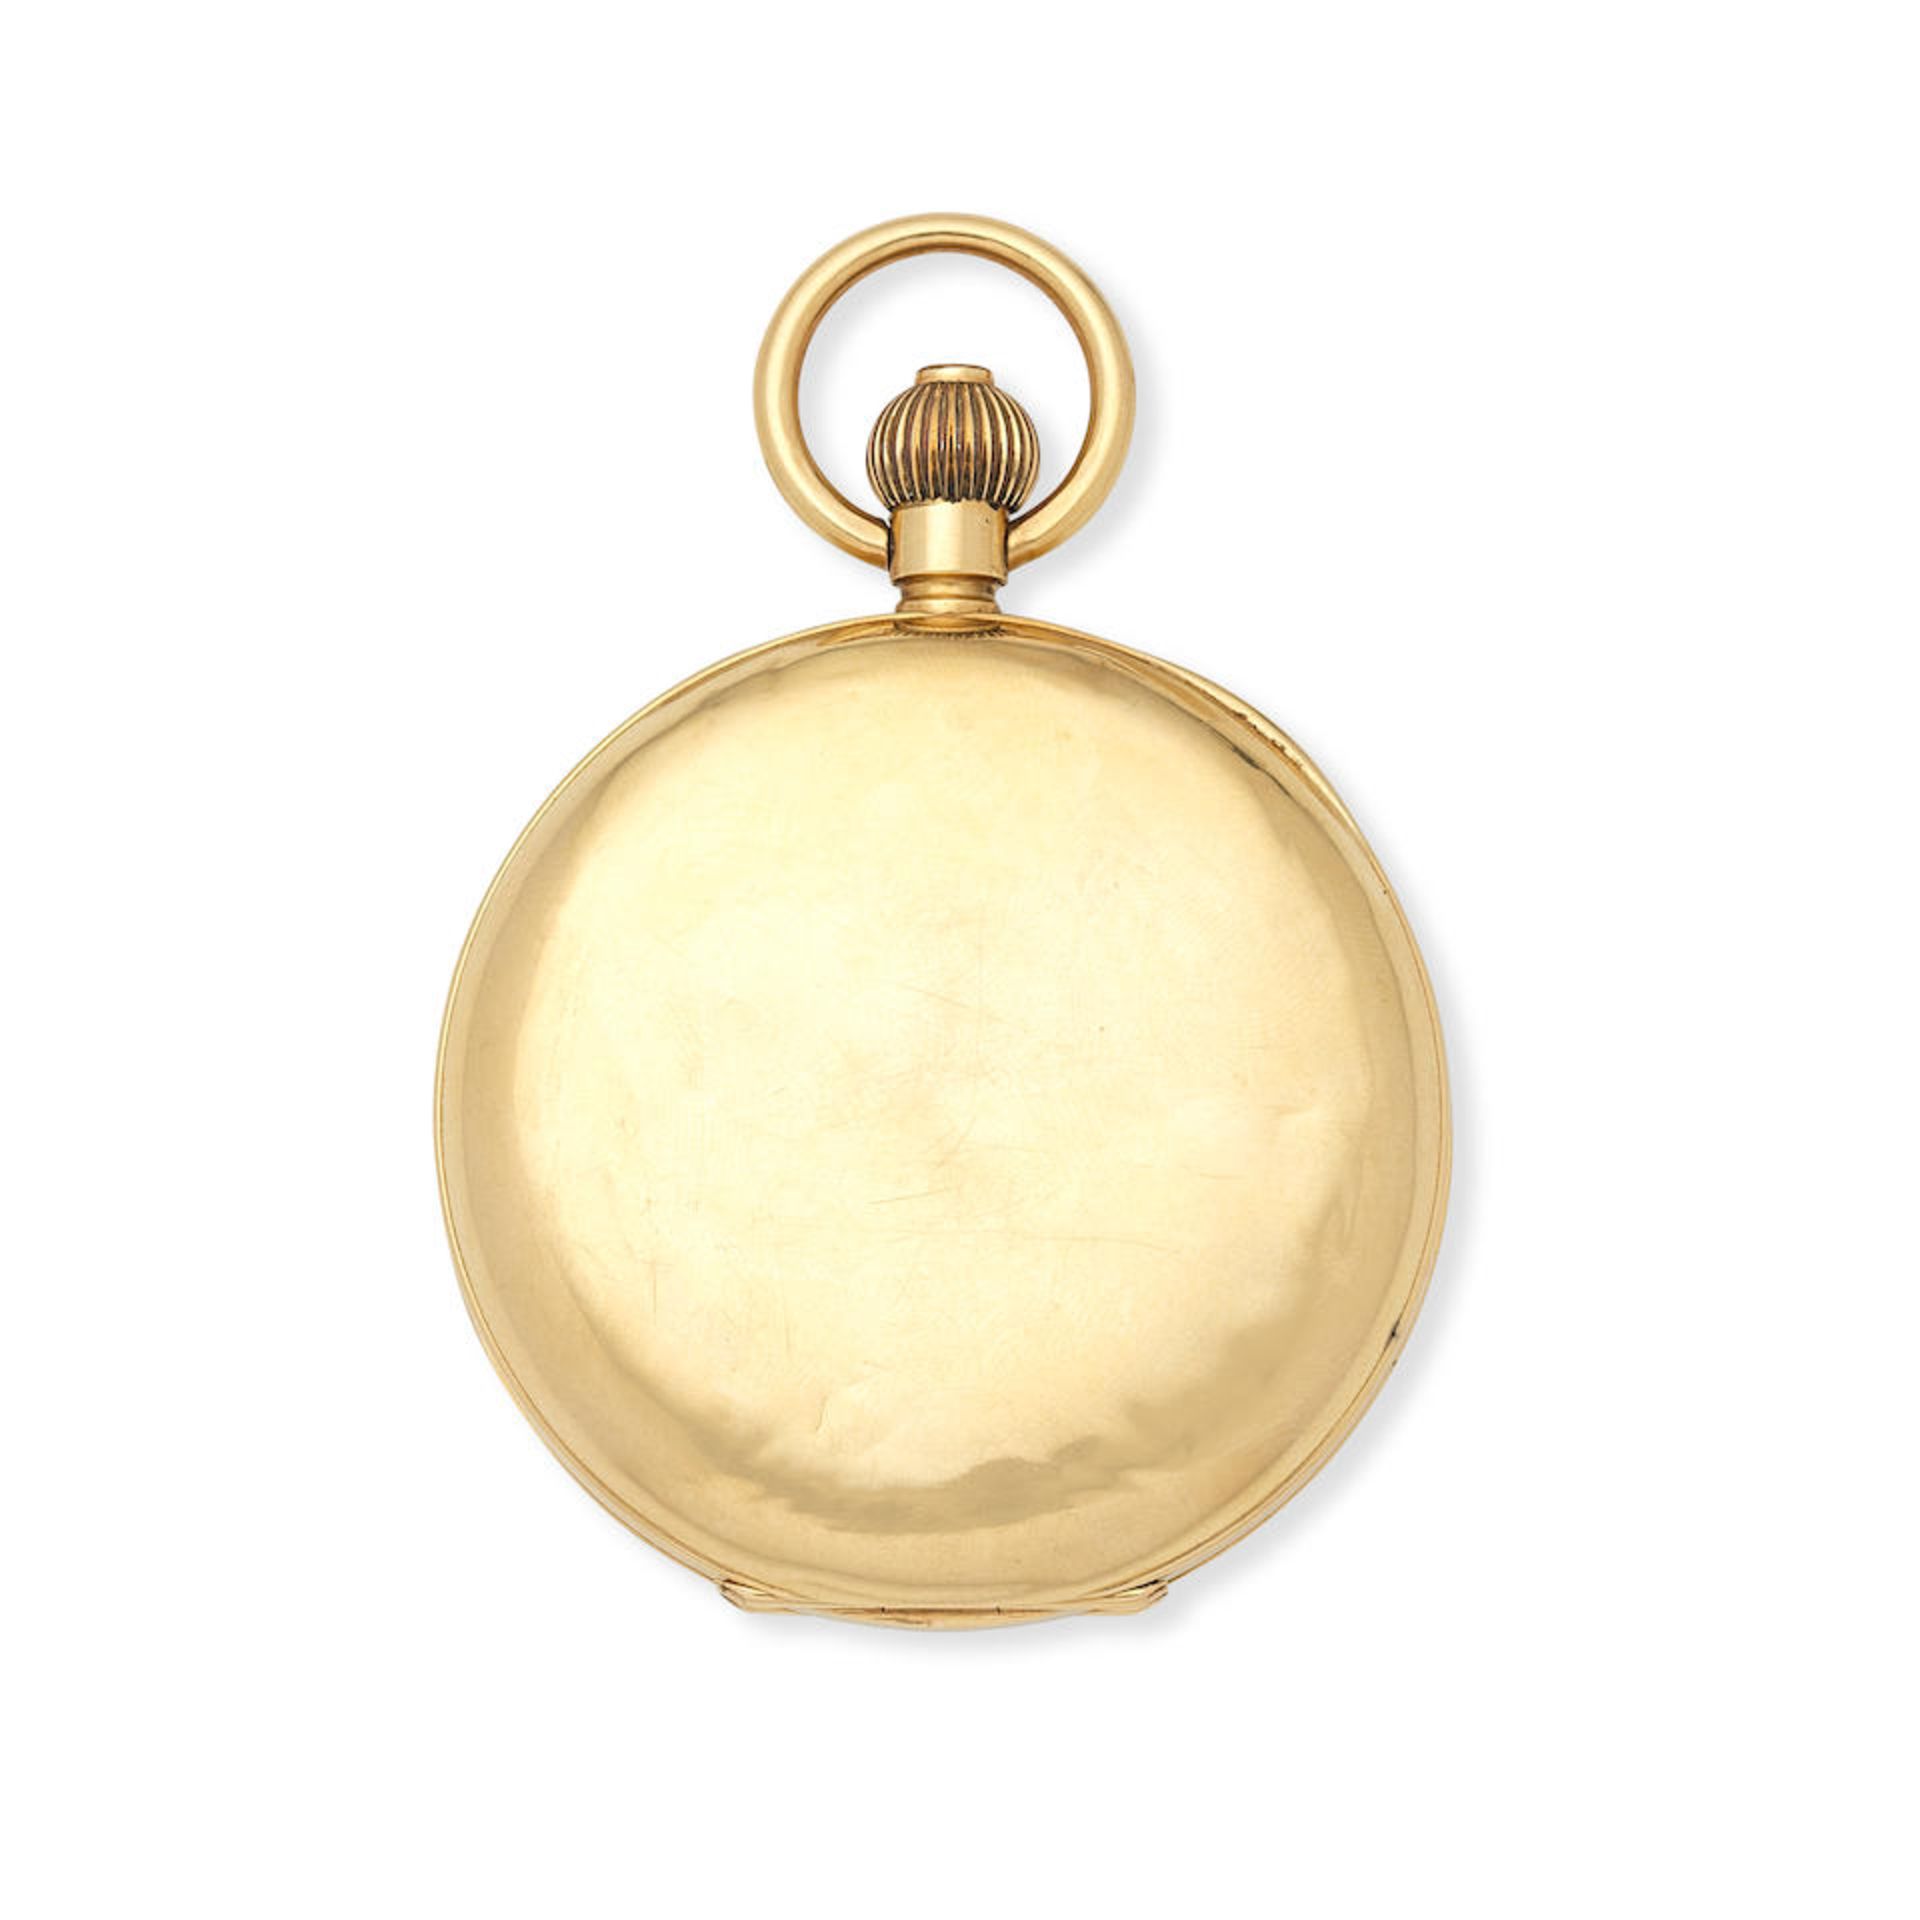 An 18K gold keyless wind open face chronograph pocket watch Circa 1900 - Image 2 of 3